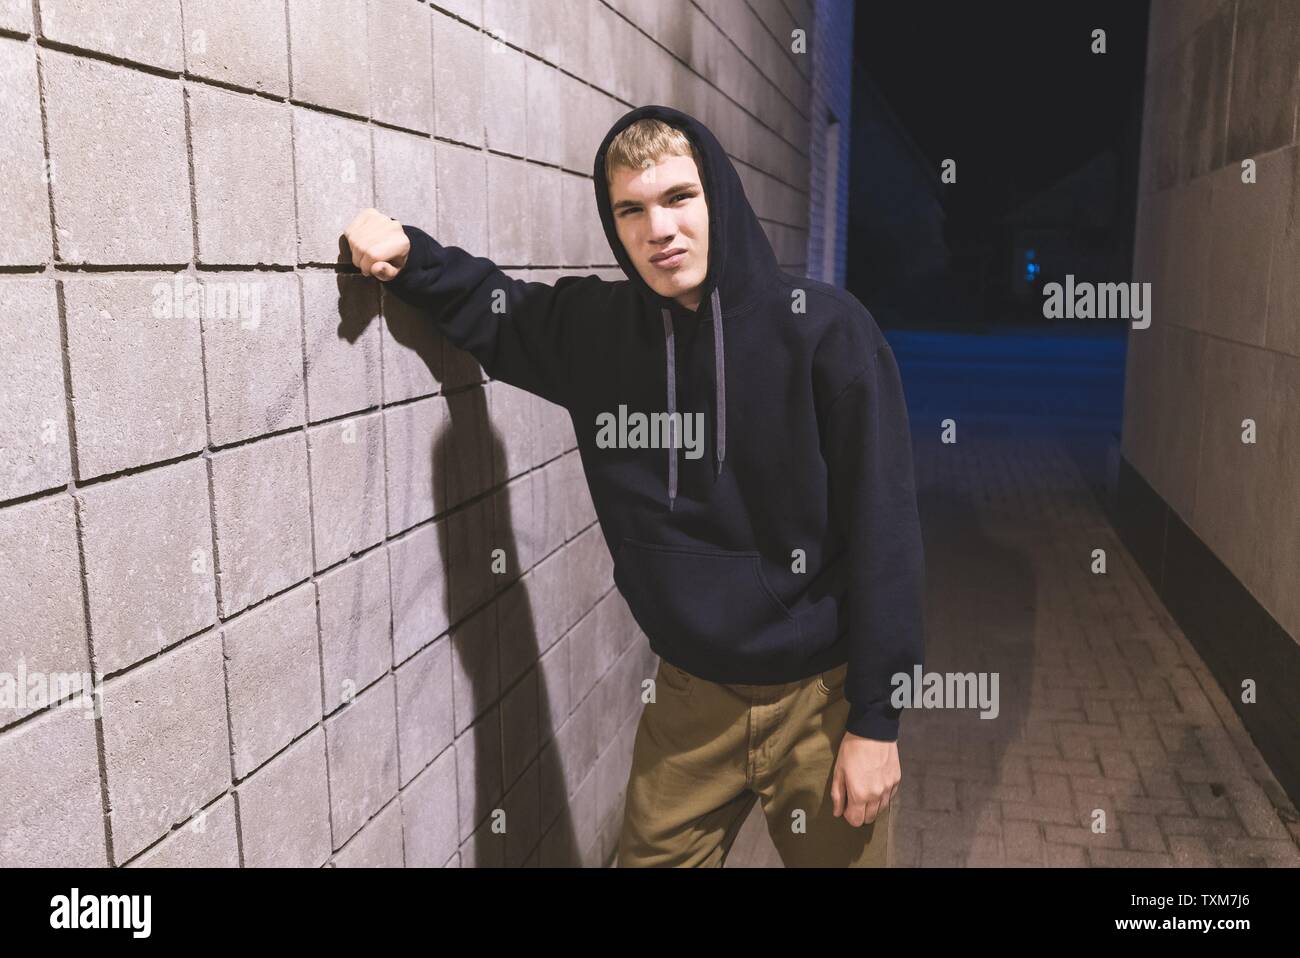 Hooded teenager leaning against a brick wall in an alleyway. He is ...